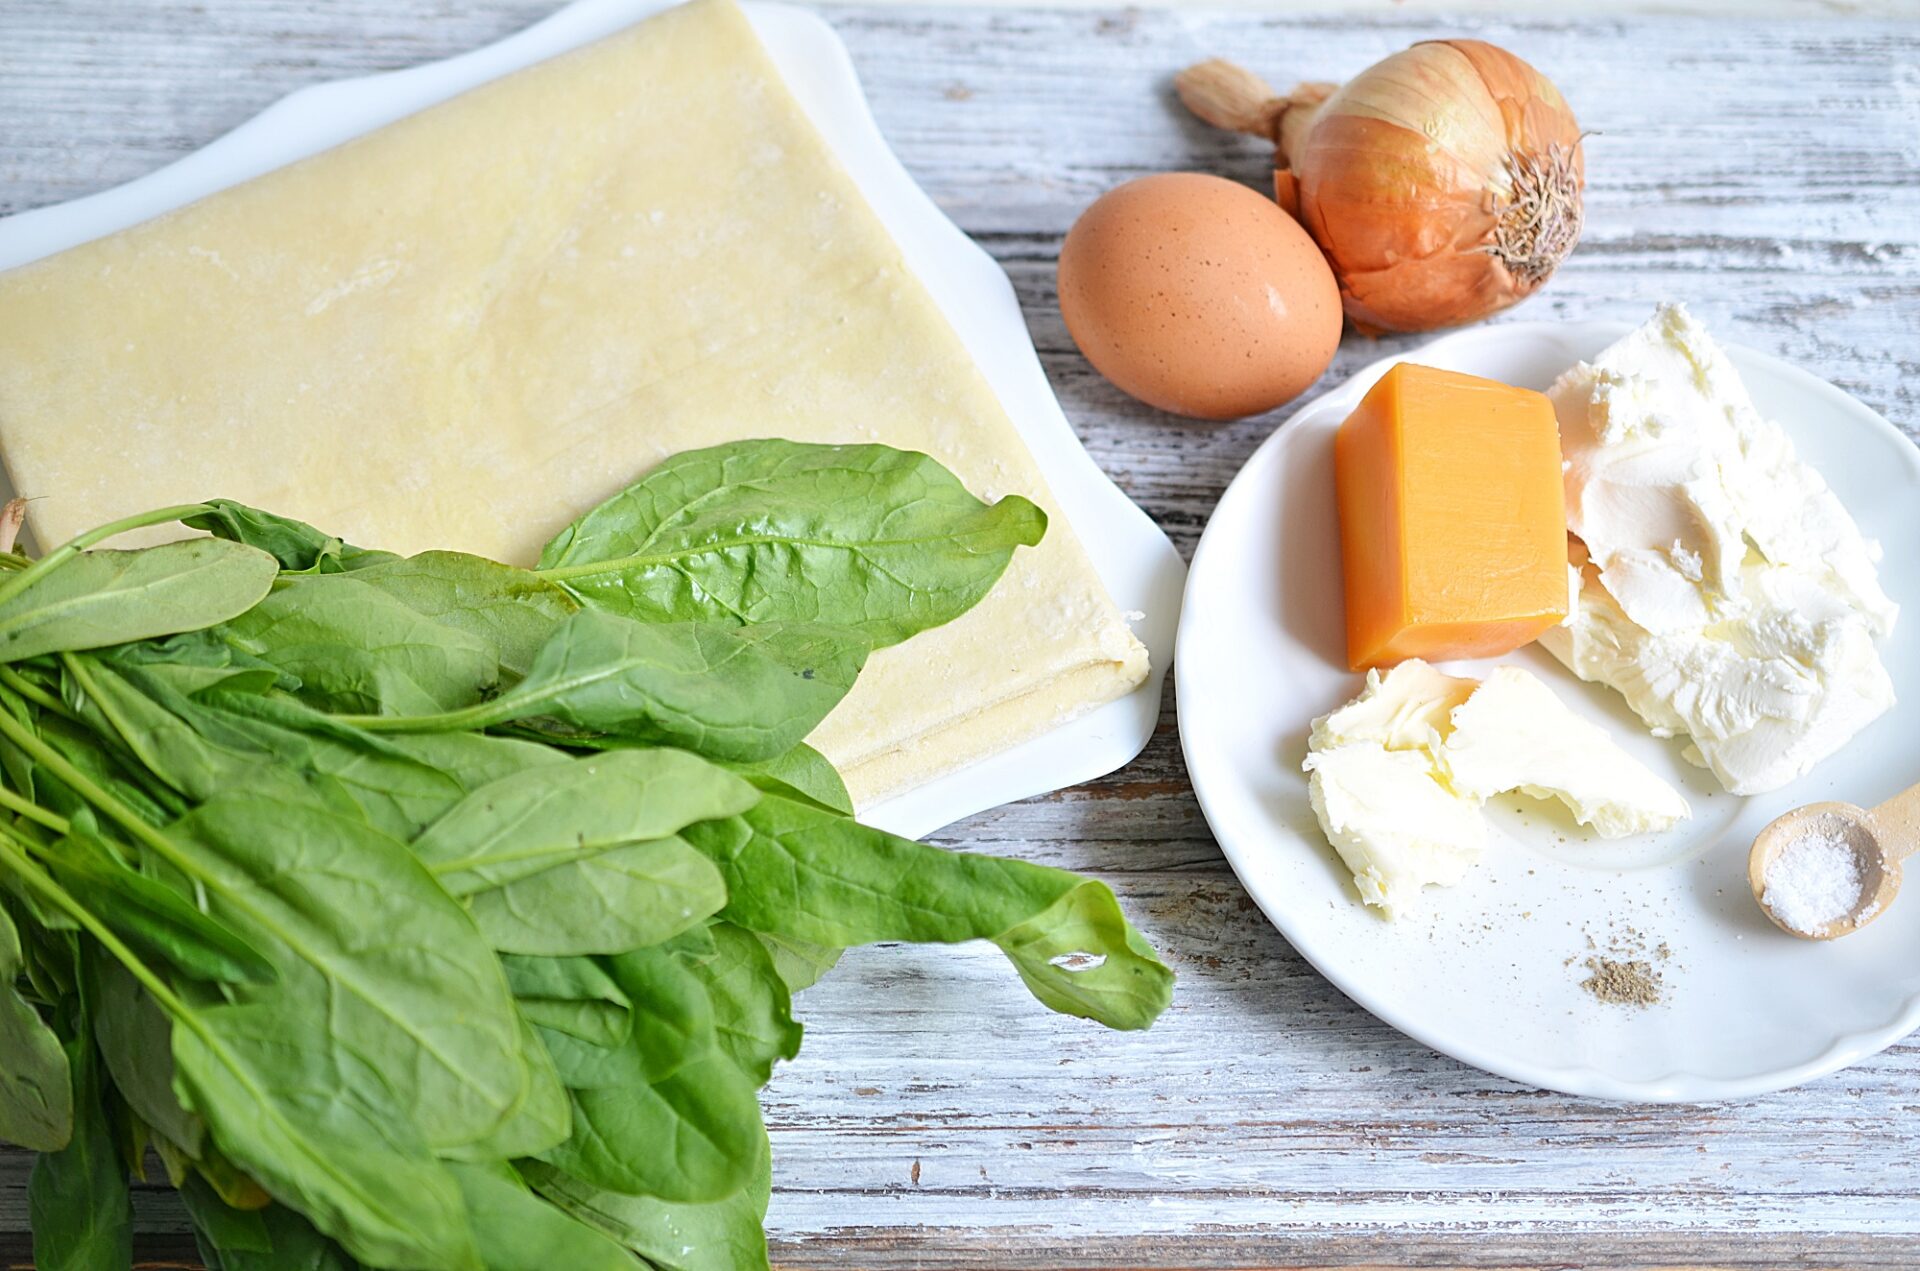 Ingredients for spinach and feta quiche on a counter.